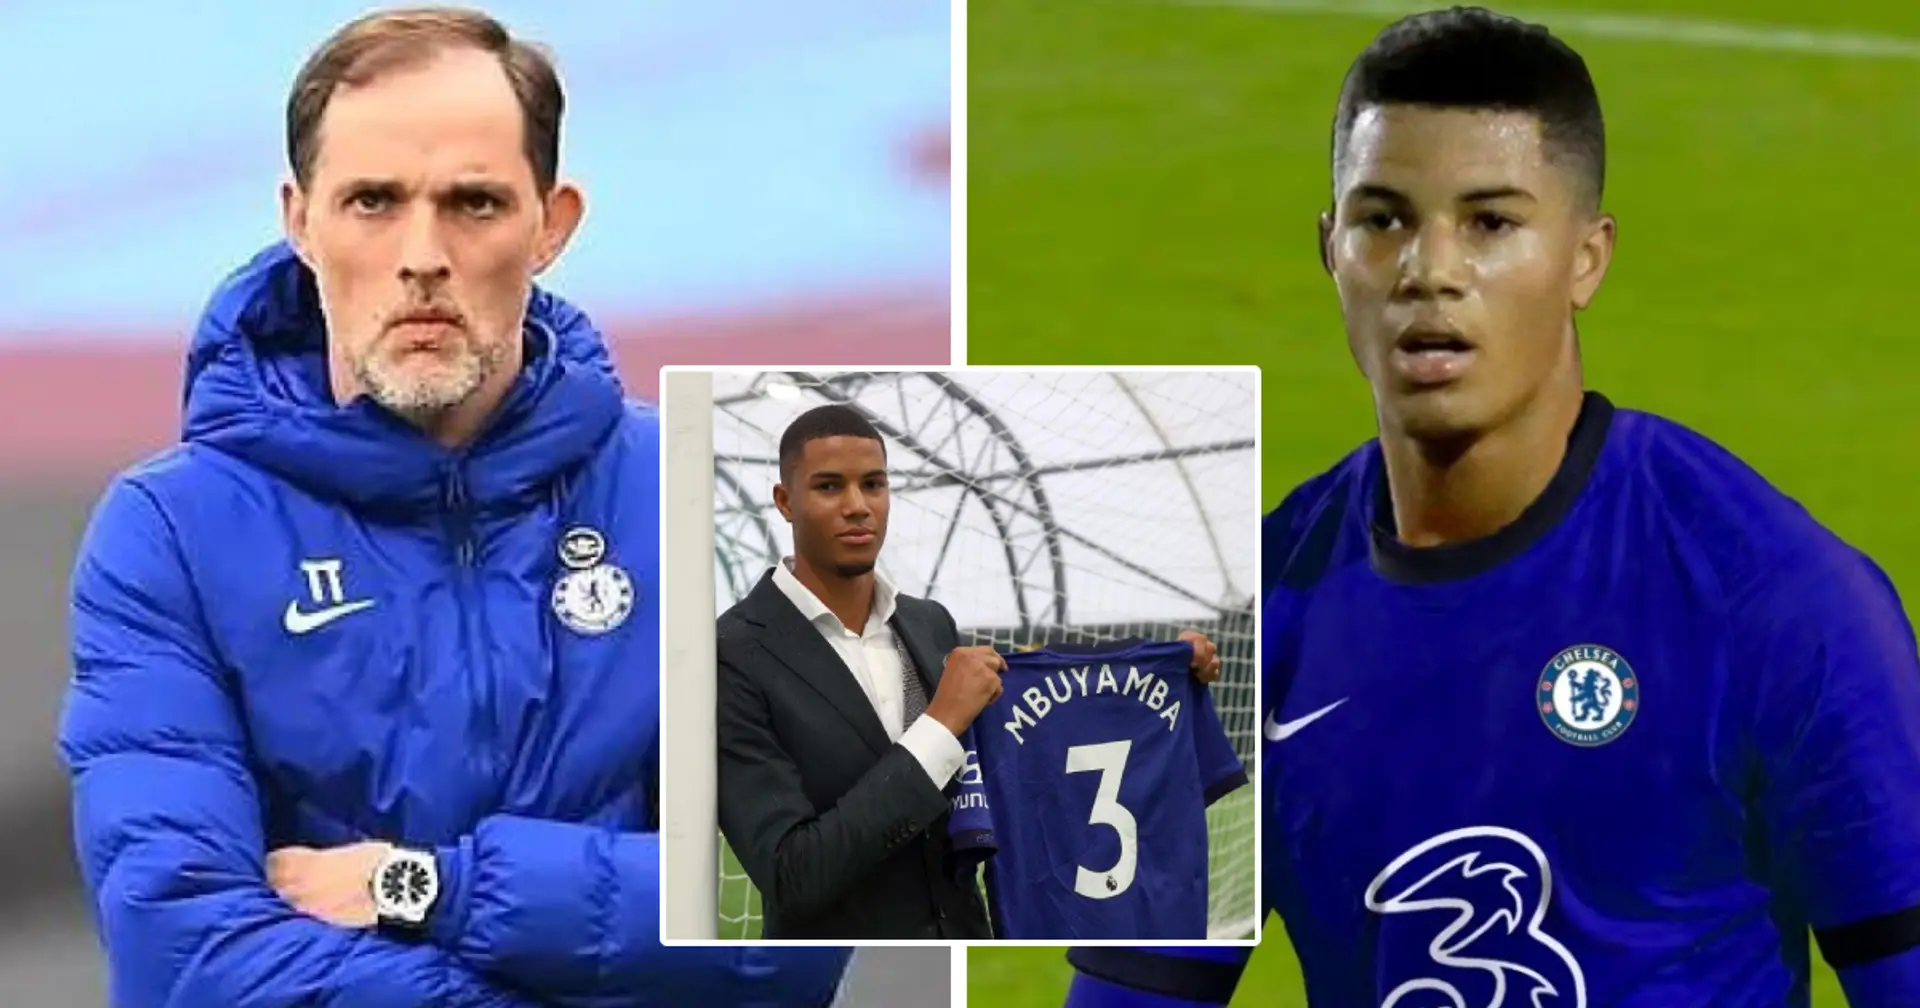 What's happened to Chelsea's 'new Van Dijk' Xavier Mbuyamba hijacked from Spain? Explained